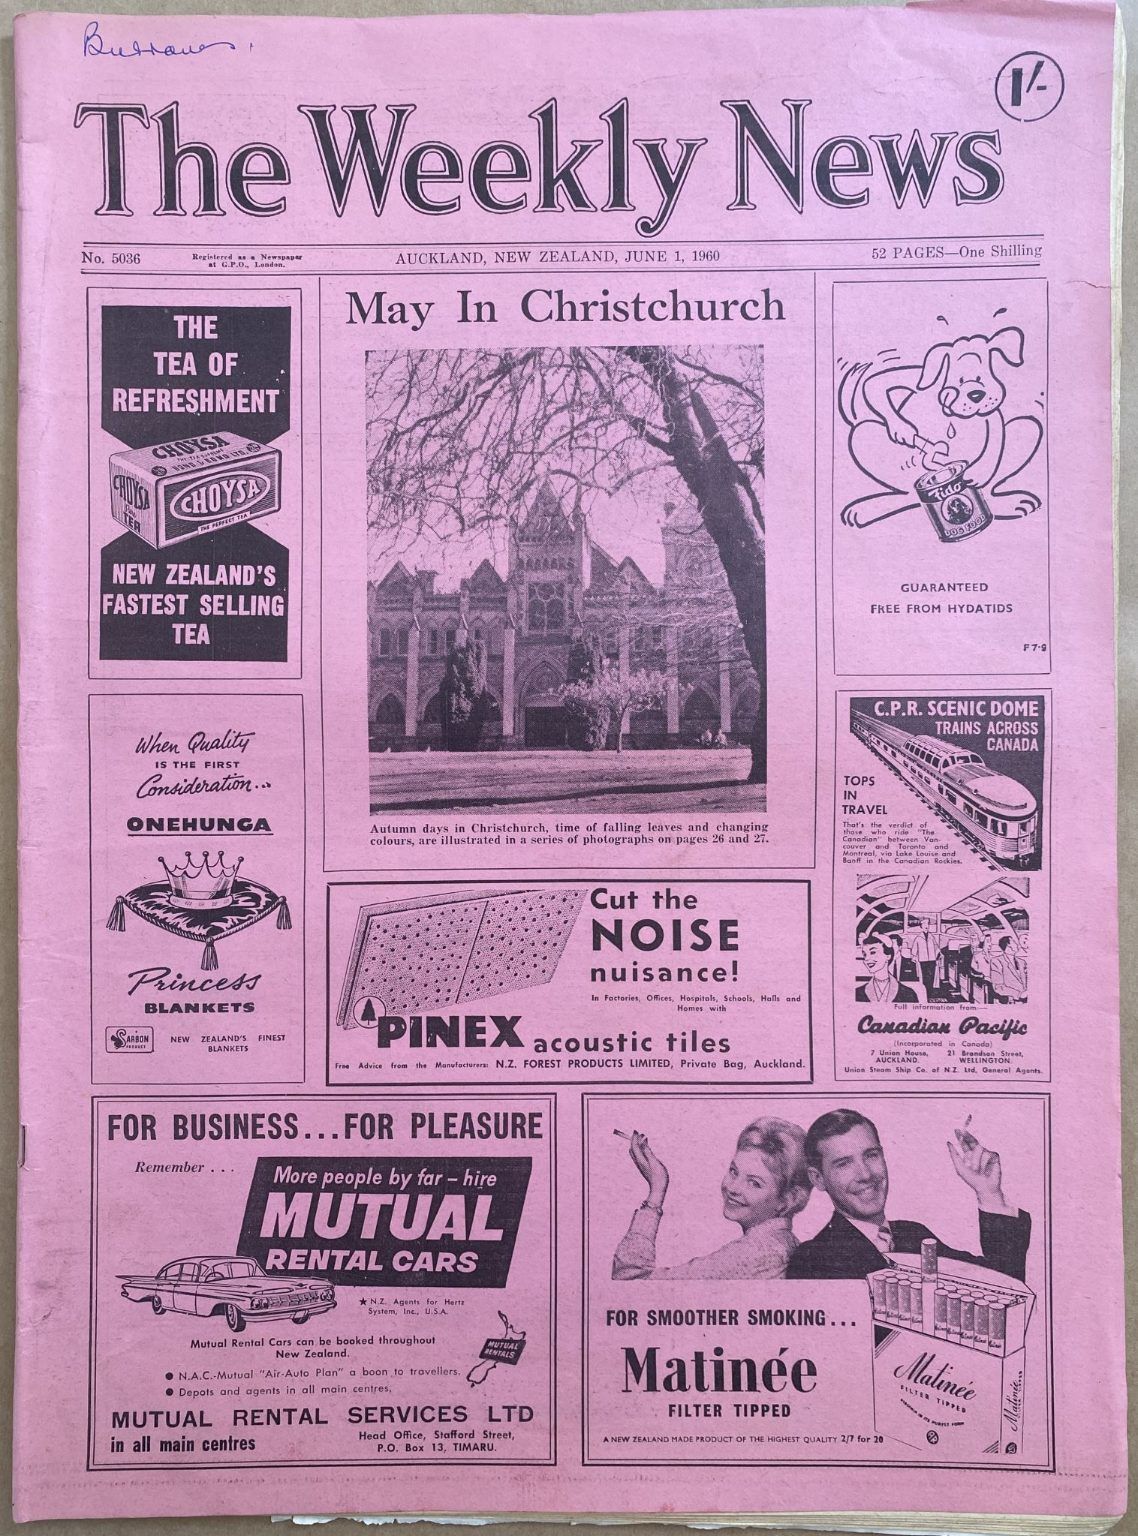 OLD NEWSPAPER: The Weekly News, No. 5036, 1 June 1960